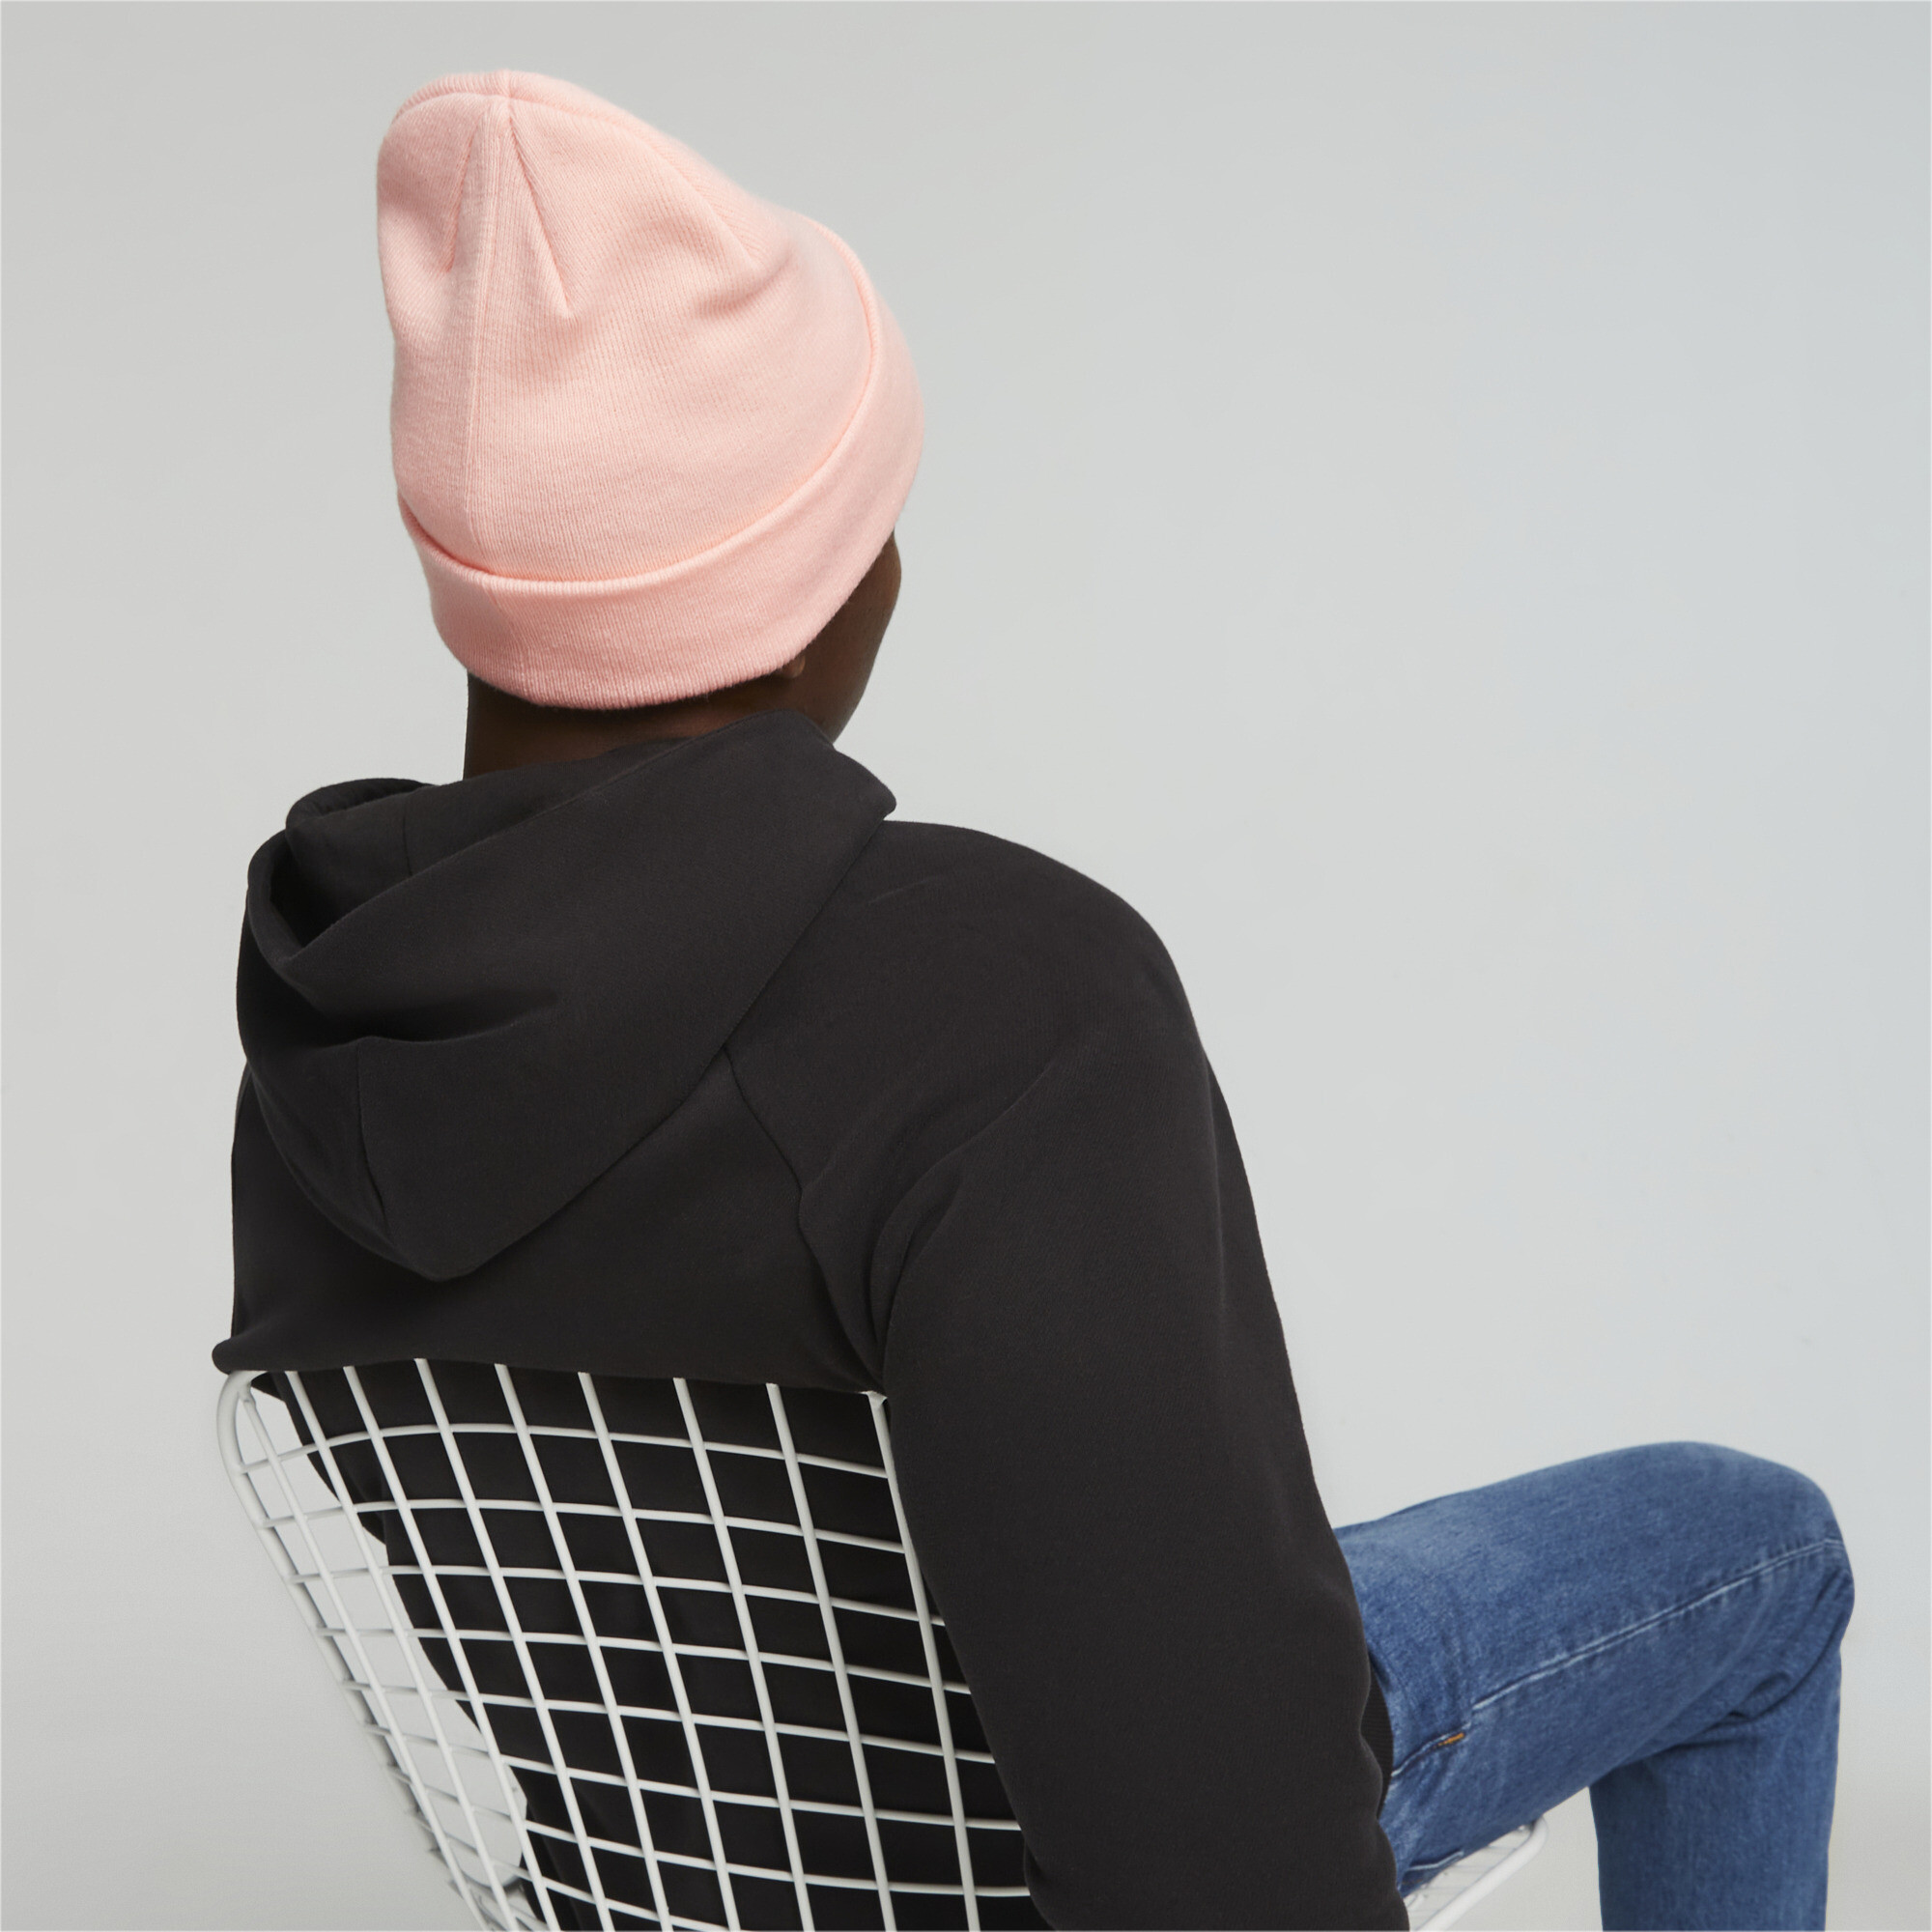 Puma Archive Heather Beanie Hat, Pink, Size Adult, Accessories